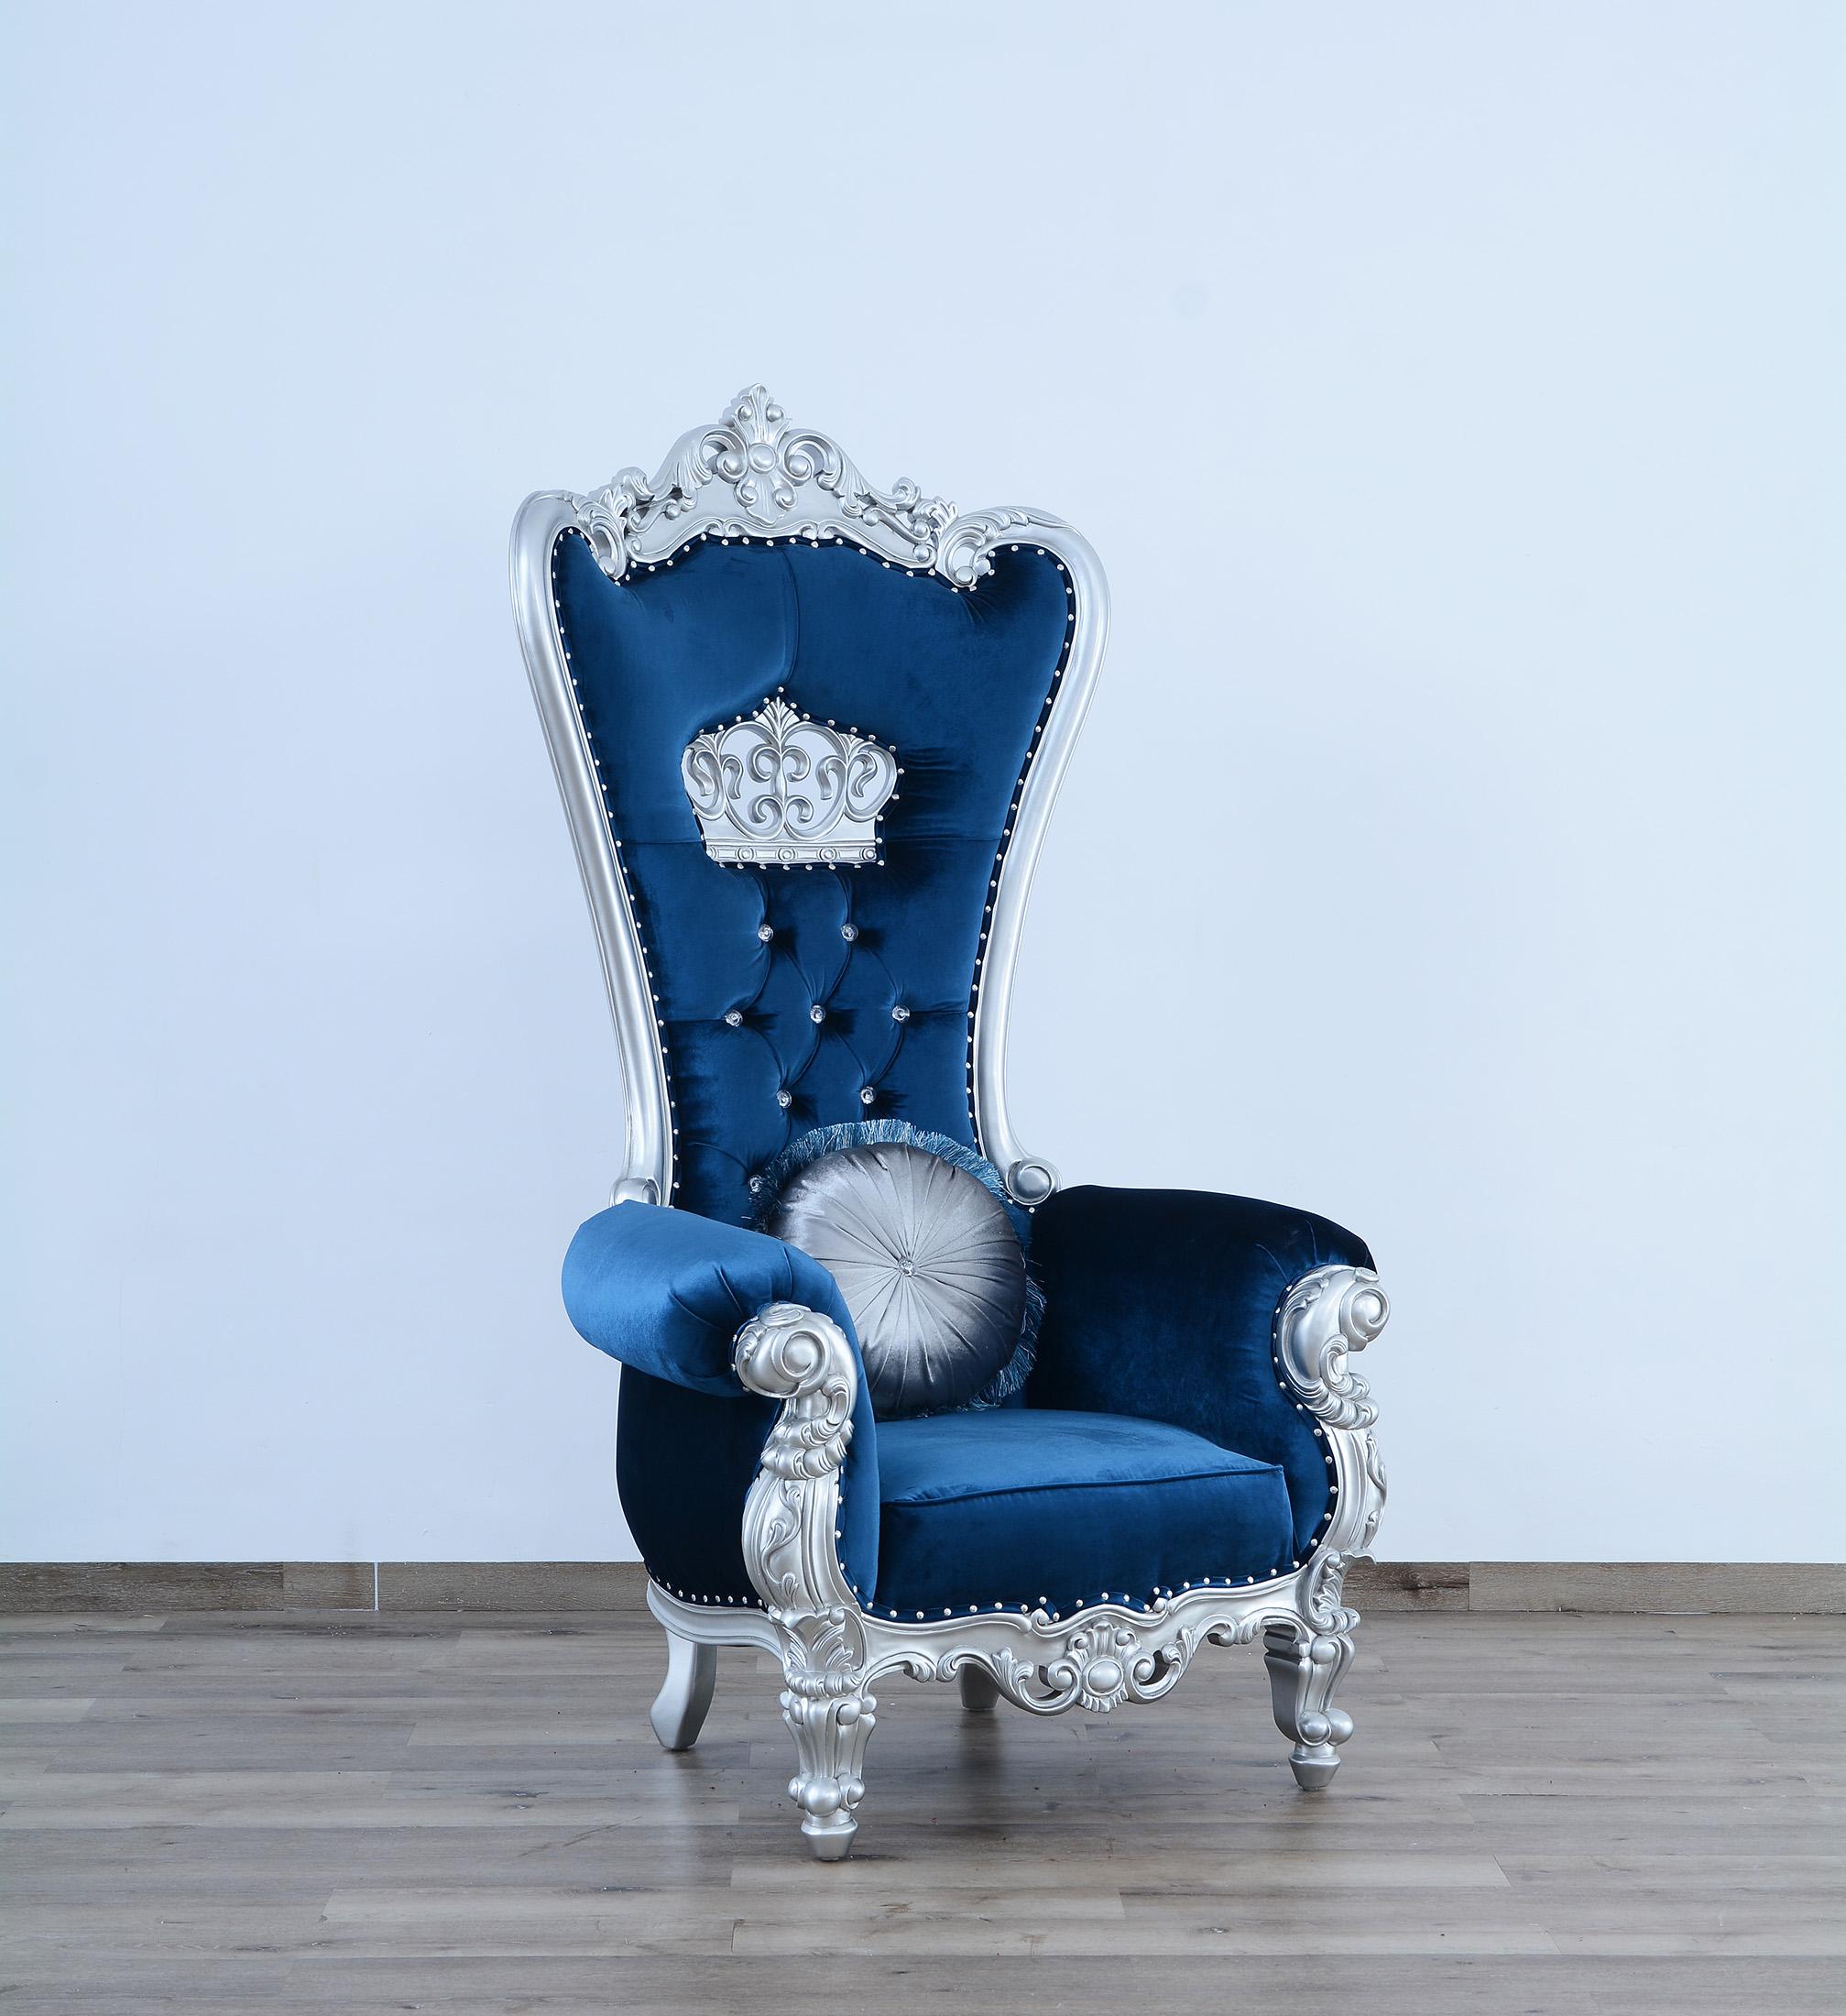 Luxurious Royal Pastel Blue Accent Chair from our Venetian modern c